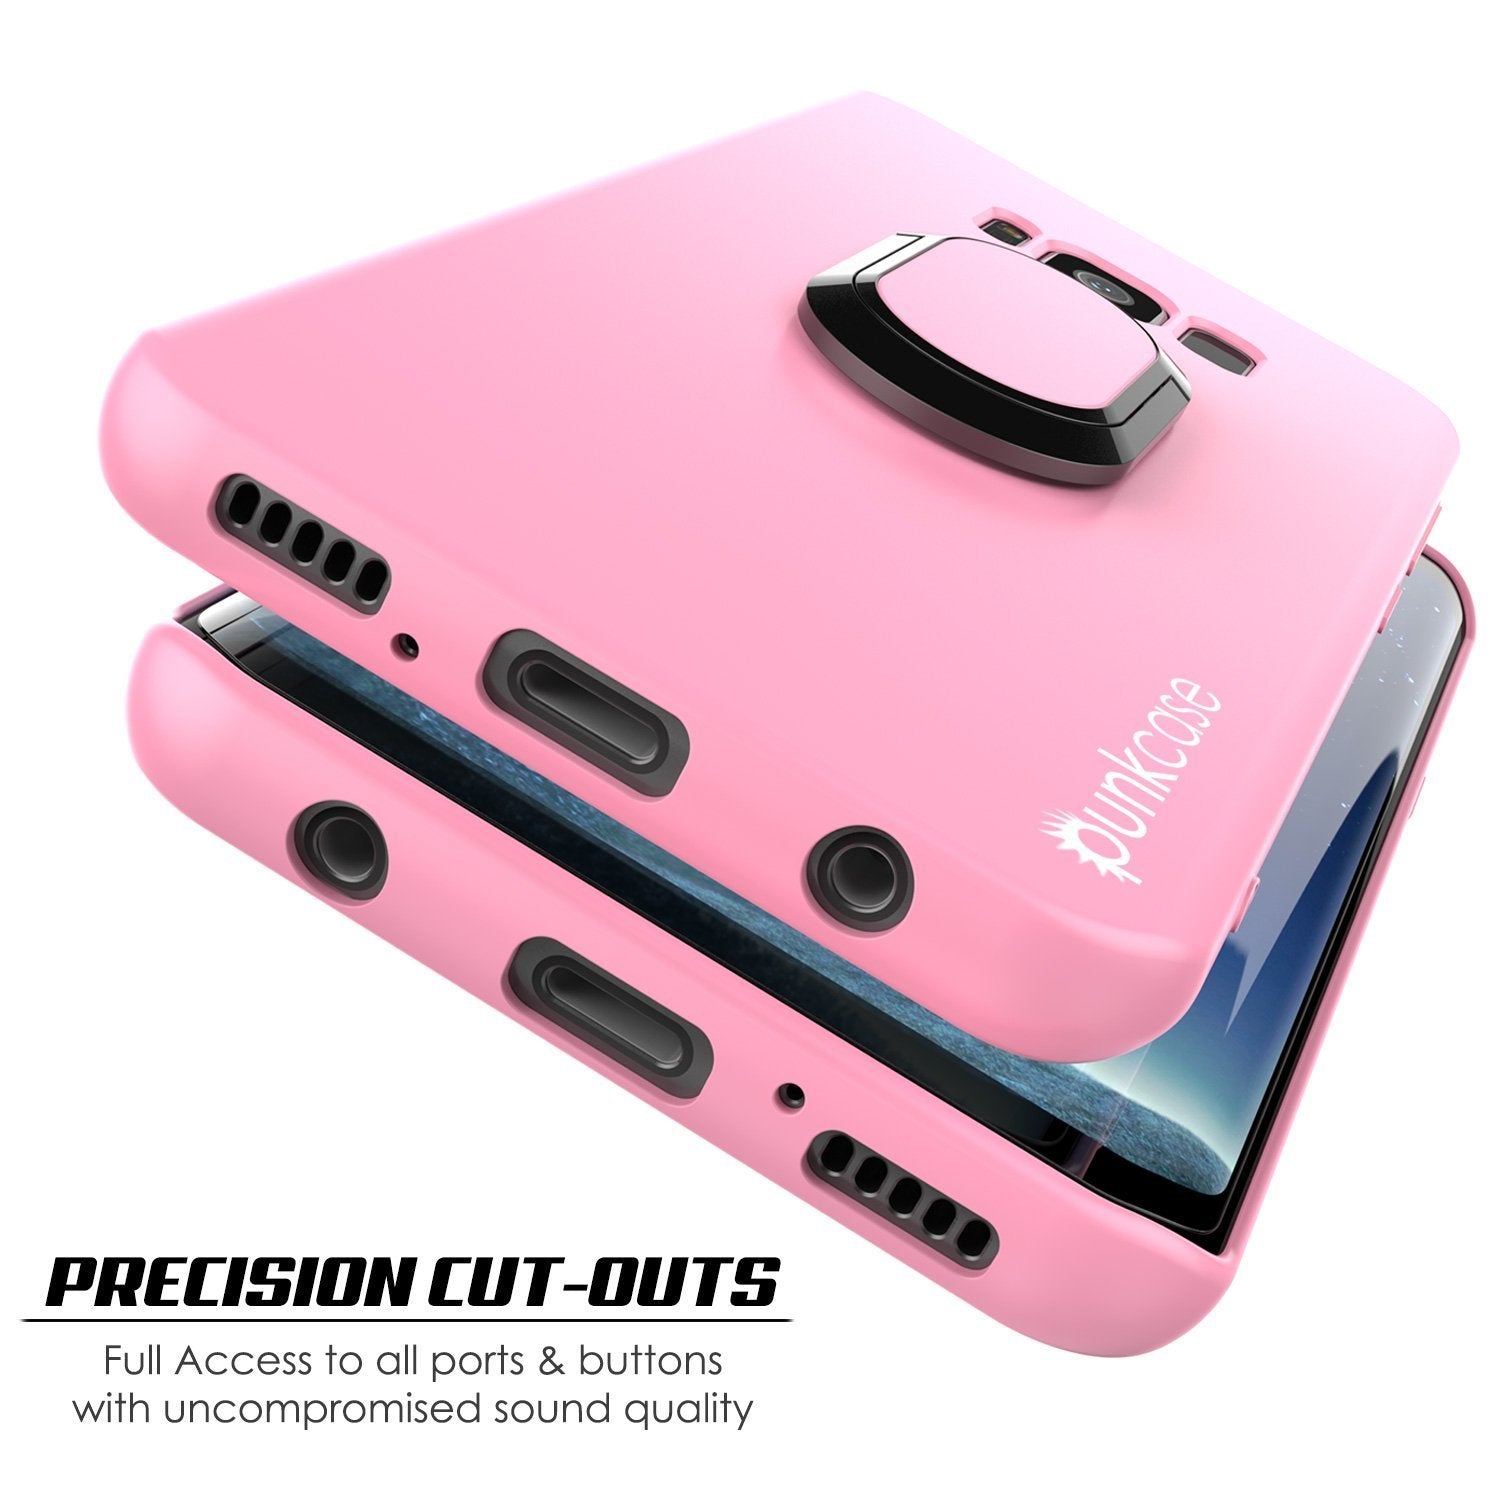 Galaxy S8 Case, Punkcase Magnetix Protective TPU Cover W/ Kickstand, Screen Protector [Pink] - PunkCase NZ